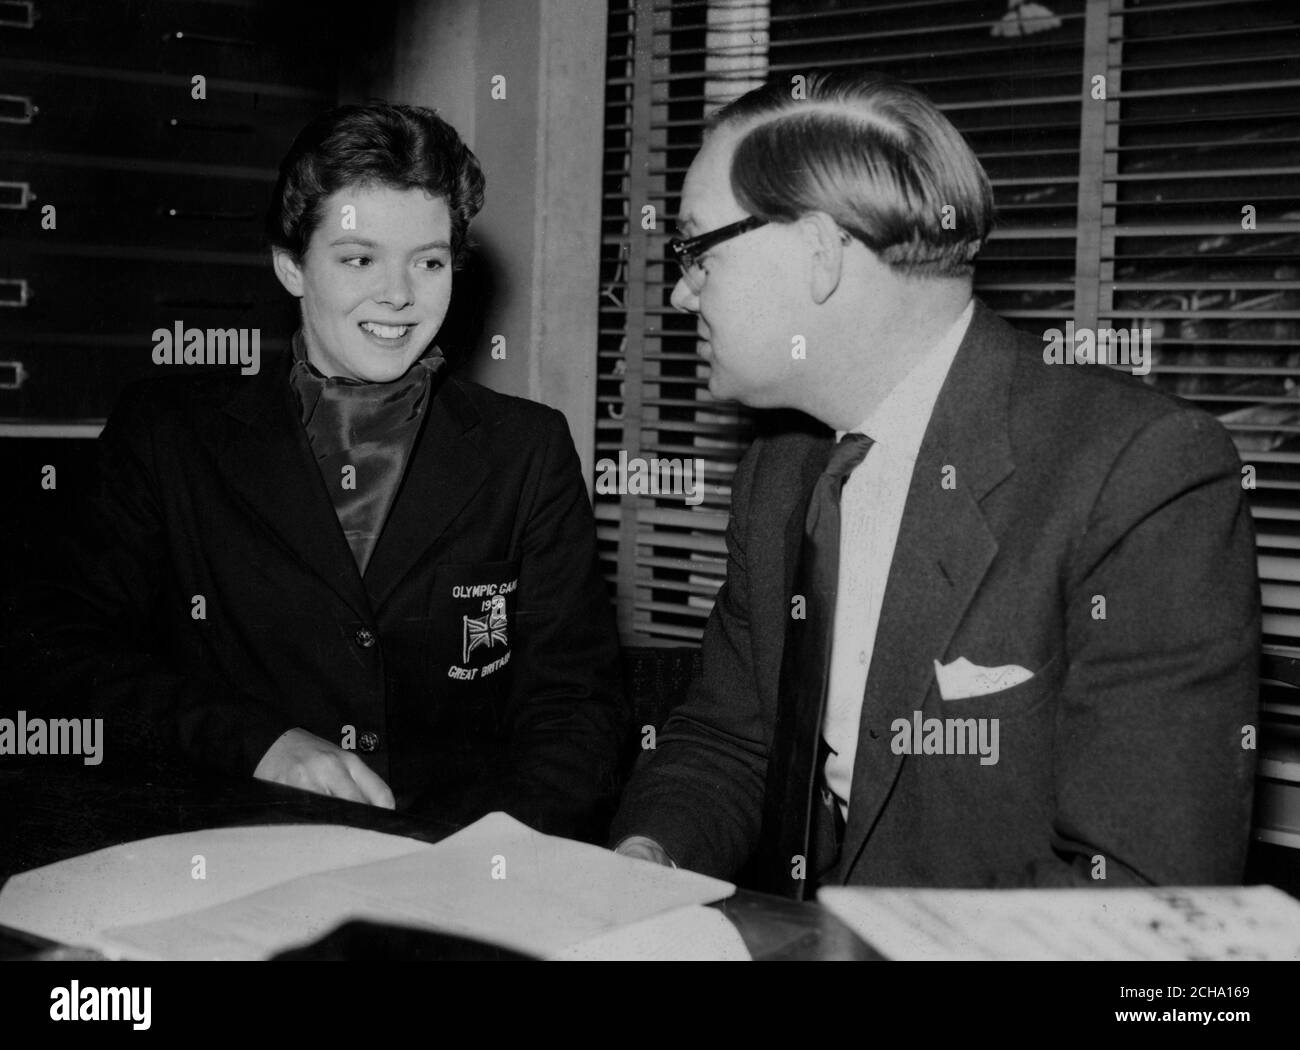 Great Britain's first Olympic gold medal swimmer for 36 years, 17-year-old Judy Grinham, who is interviewed by Cliff Michelmore for BBC Television's 'Junior sportsview' programme. *Neg corrupt. Scanned from contact Stock Photo